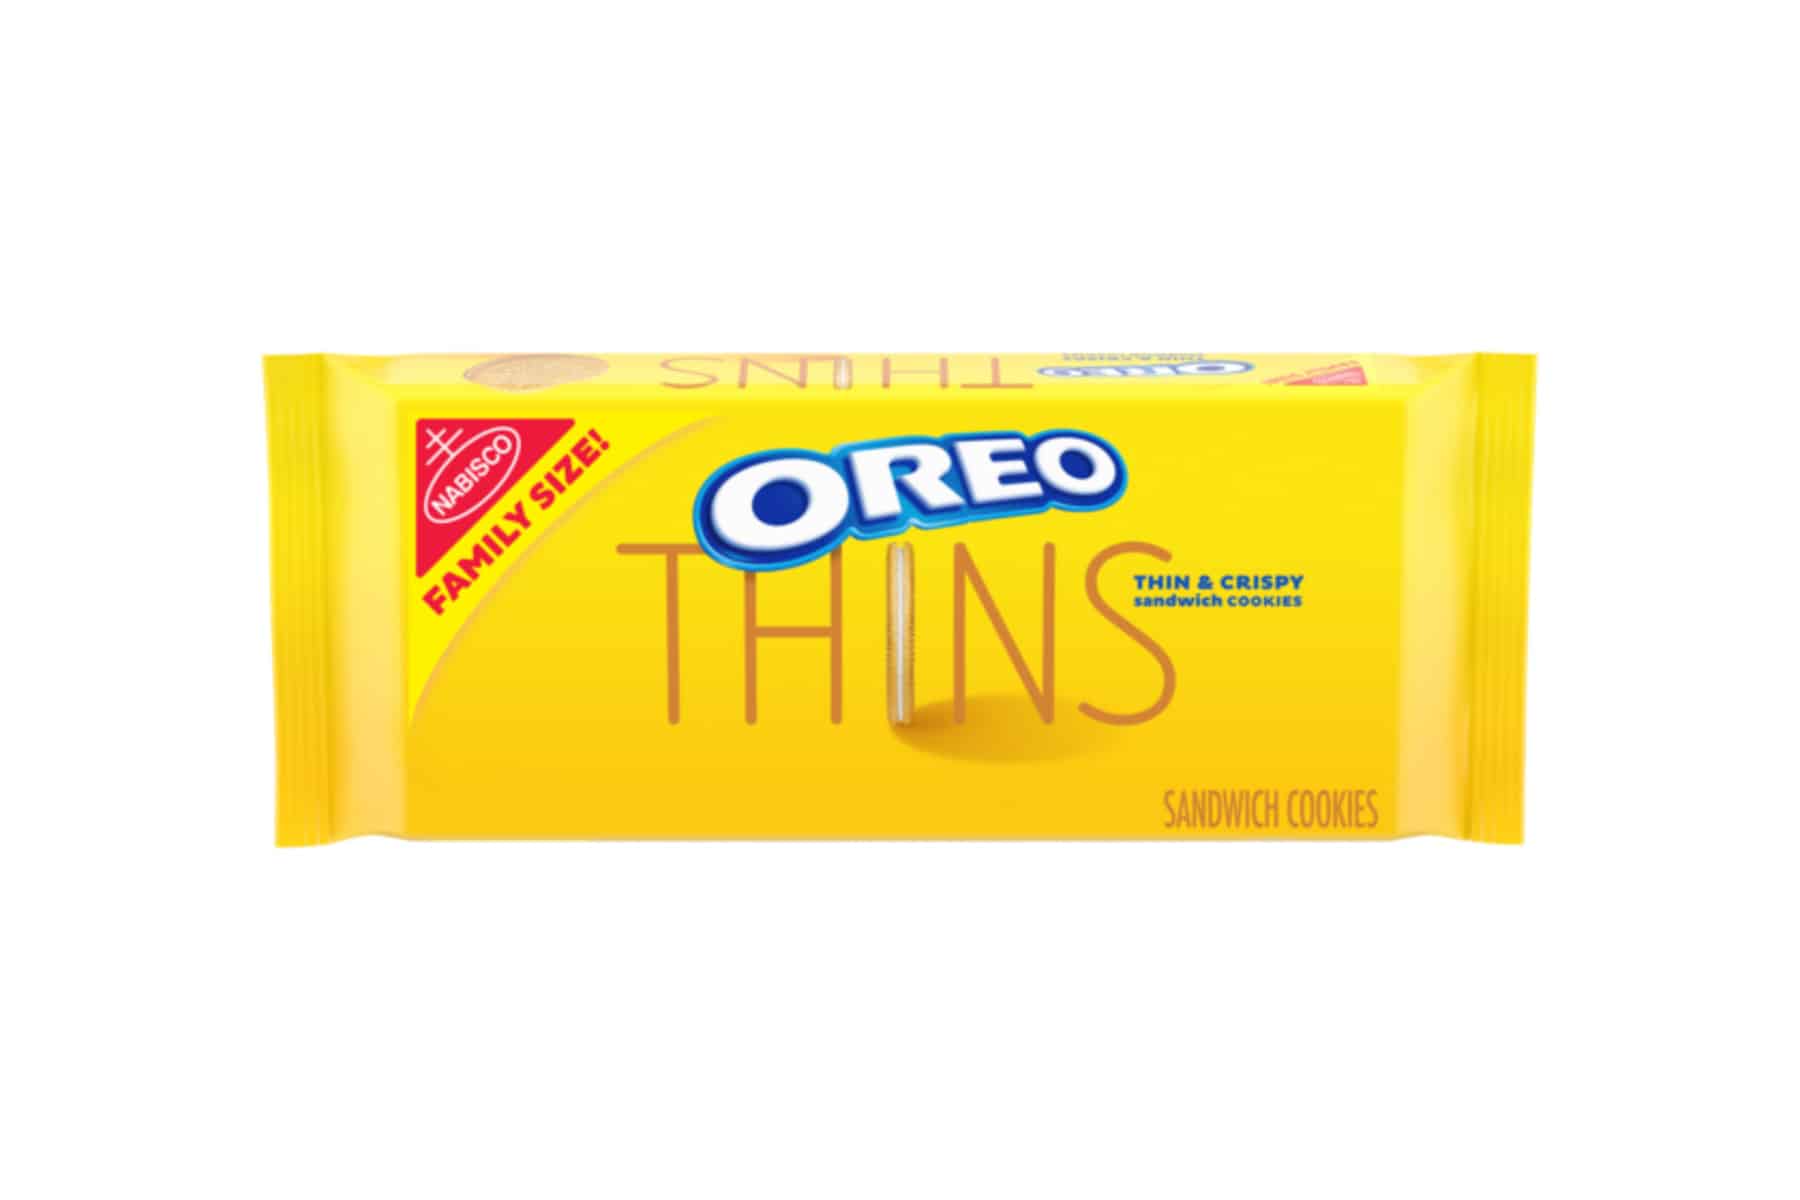 Package of Golden Oreo Thins.